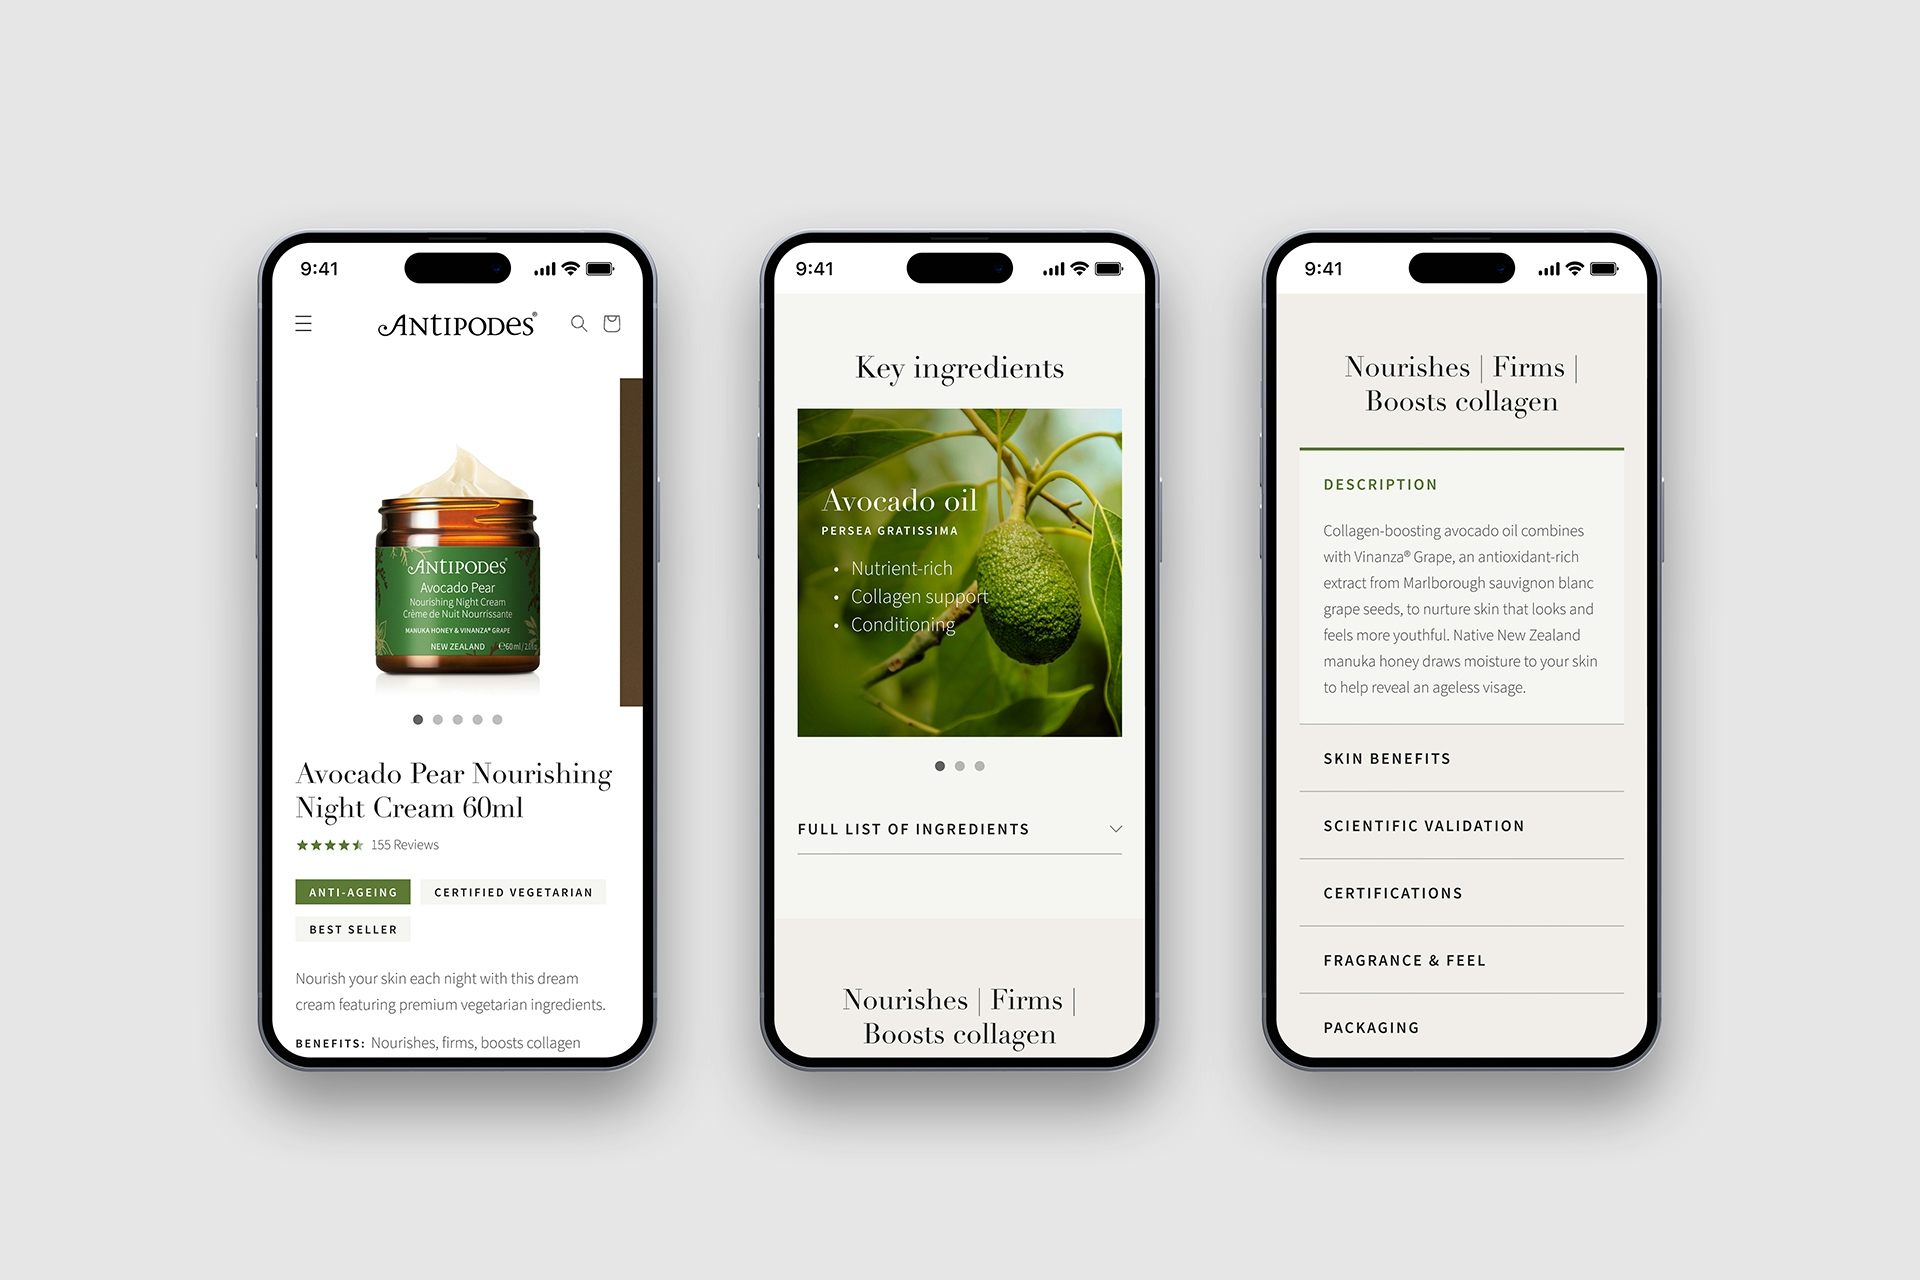 Design of moisturiser product page on mobile version of Antipodes website.